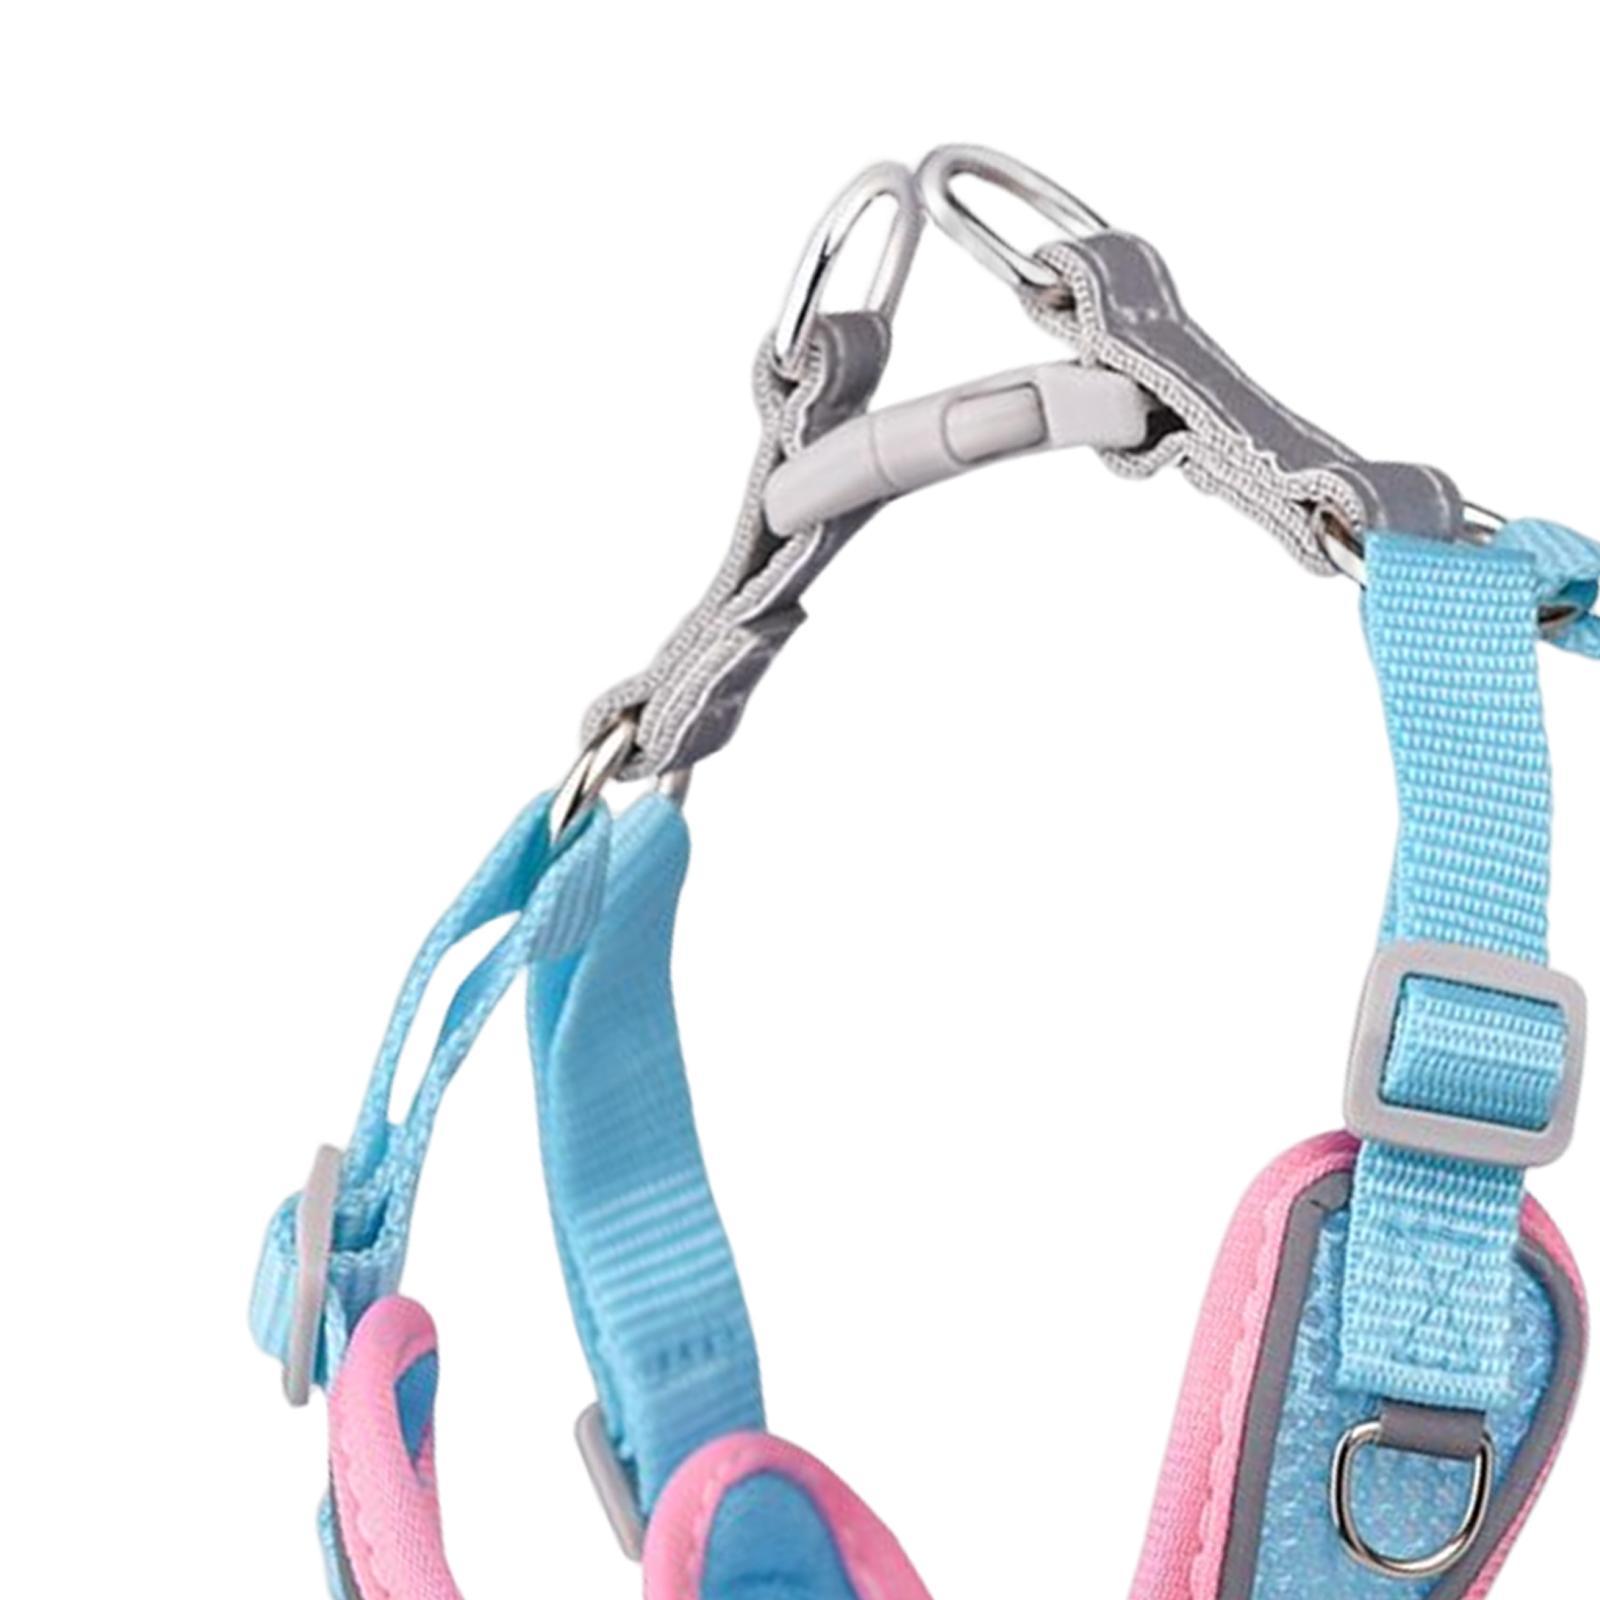 Dog Harness and Leash Set Padded Mesh Vest for Training Walking S Pink